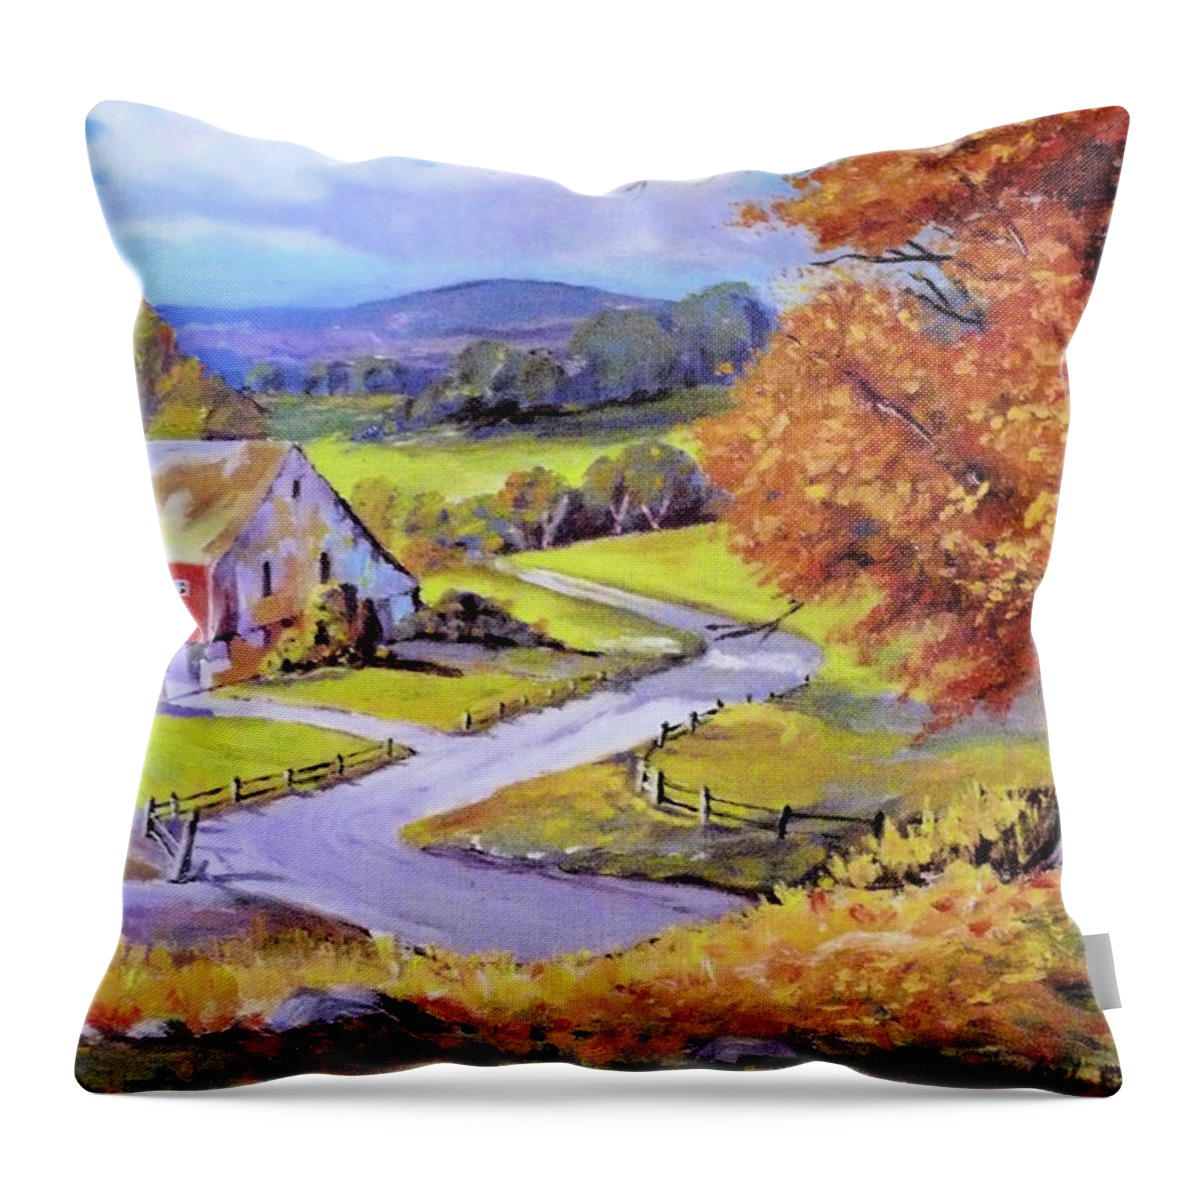 Pastoral Throw Pillow featuring the painting Pastoral View  by Joel Smith